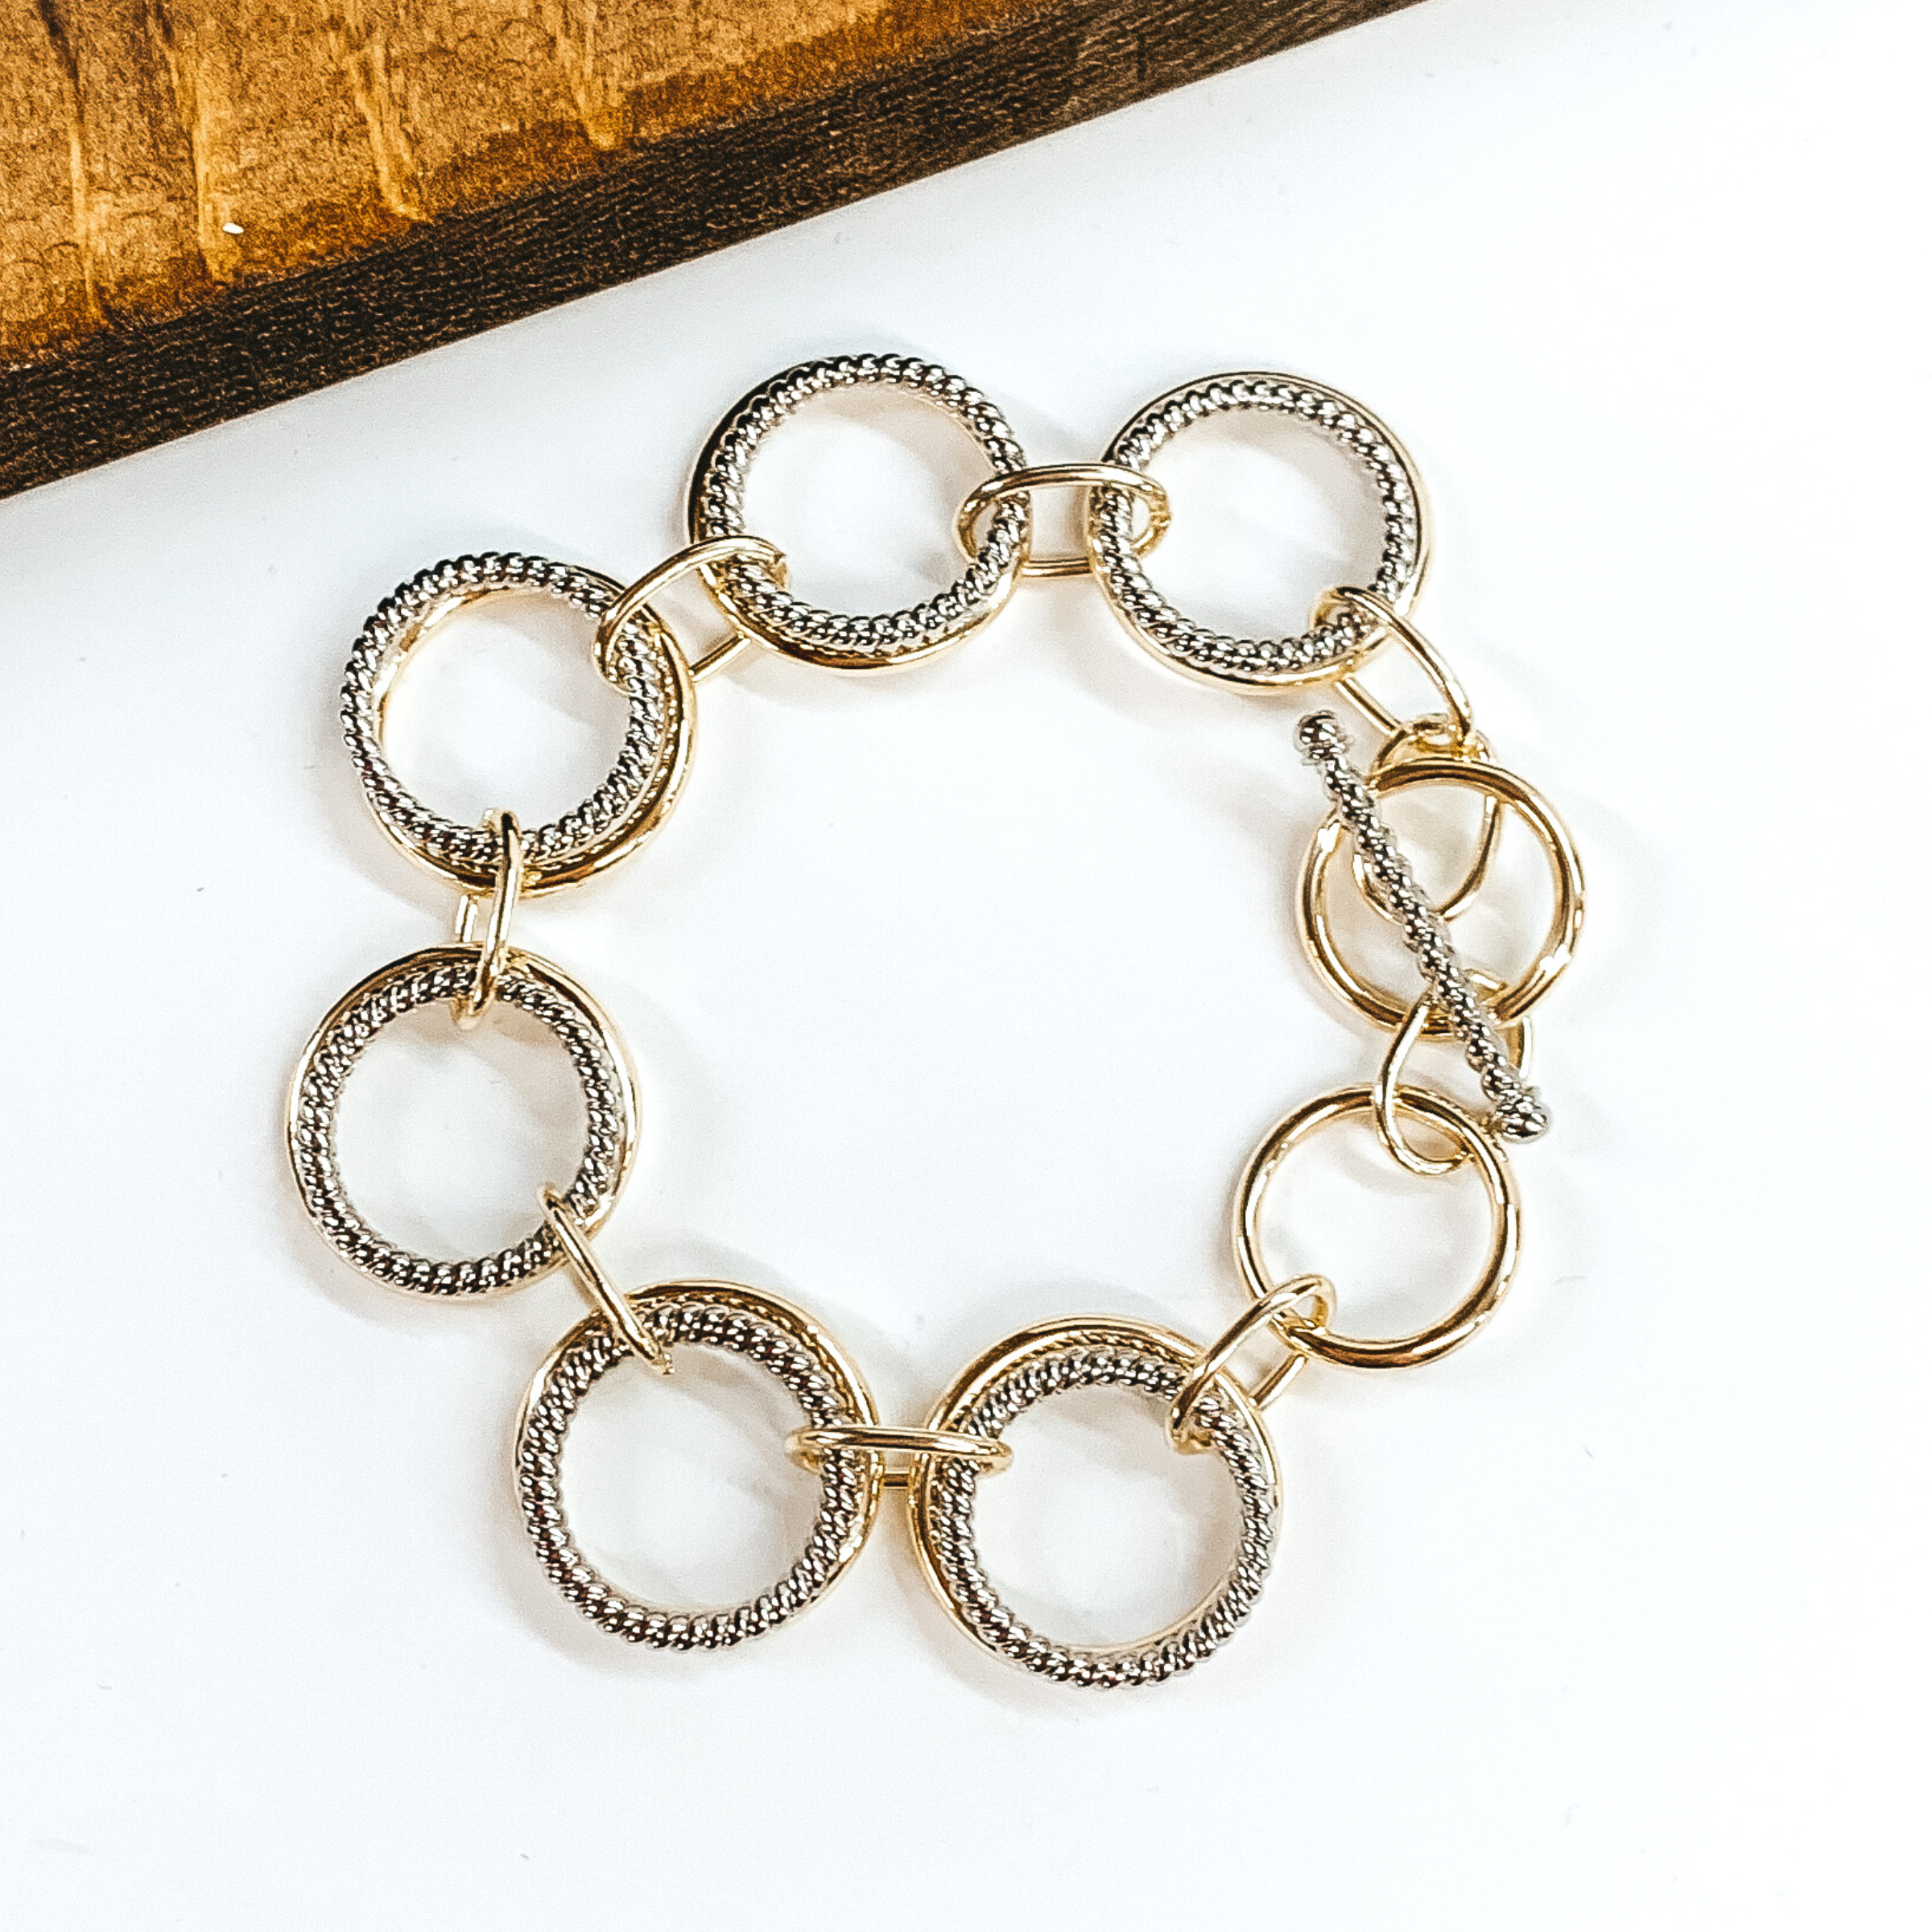 This bracelet has double circle chain link that include a smooth gold circle and a twisted silver circle. These links are connected by thin, gold rectangle chains. This bracelet has a toggle clasp. This bracelet is pictured on a white background.